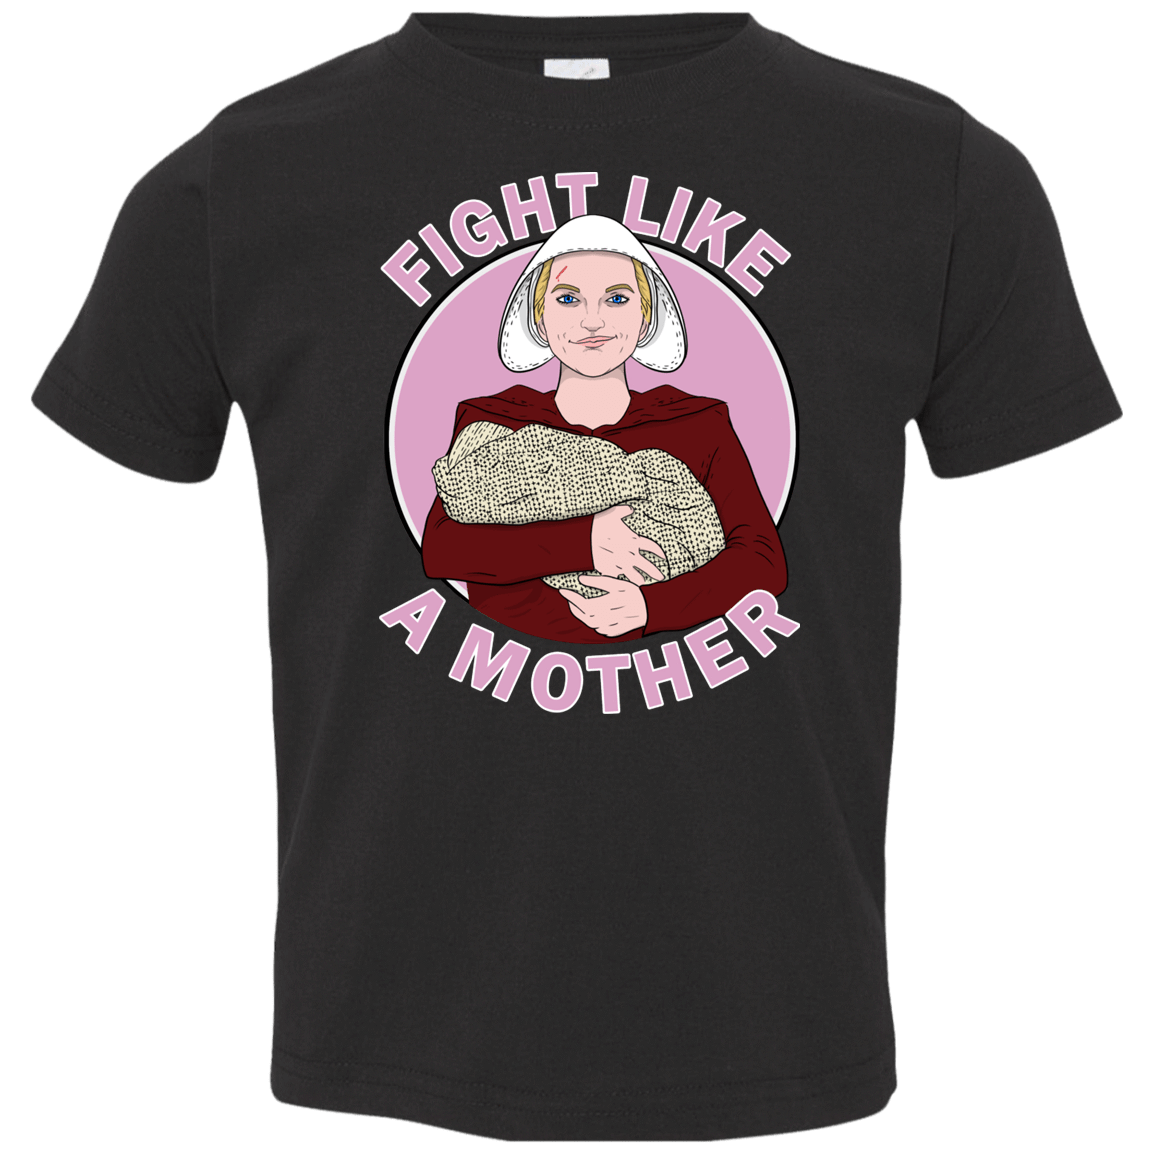 T-Shirts Black / 2T Fight Like a Mother Toddler Premium T-Shirt